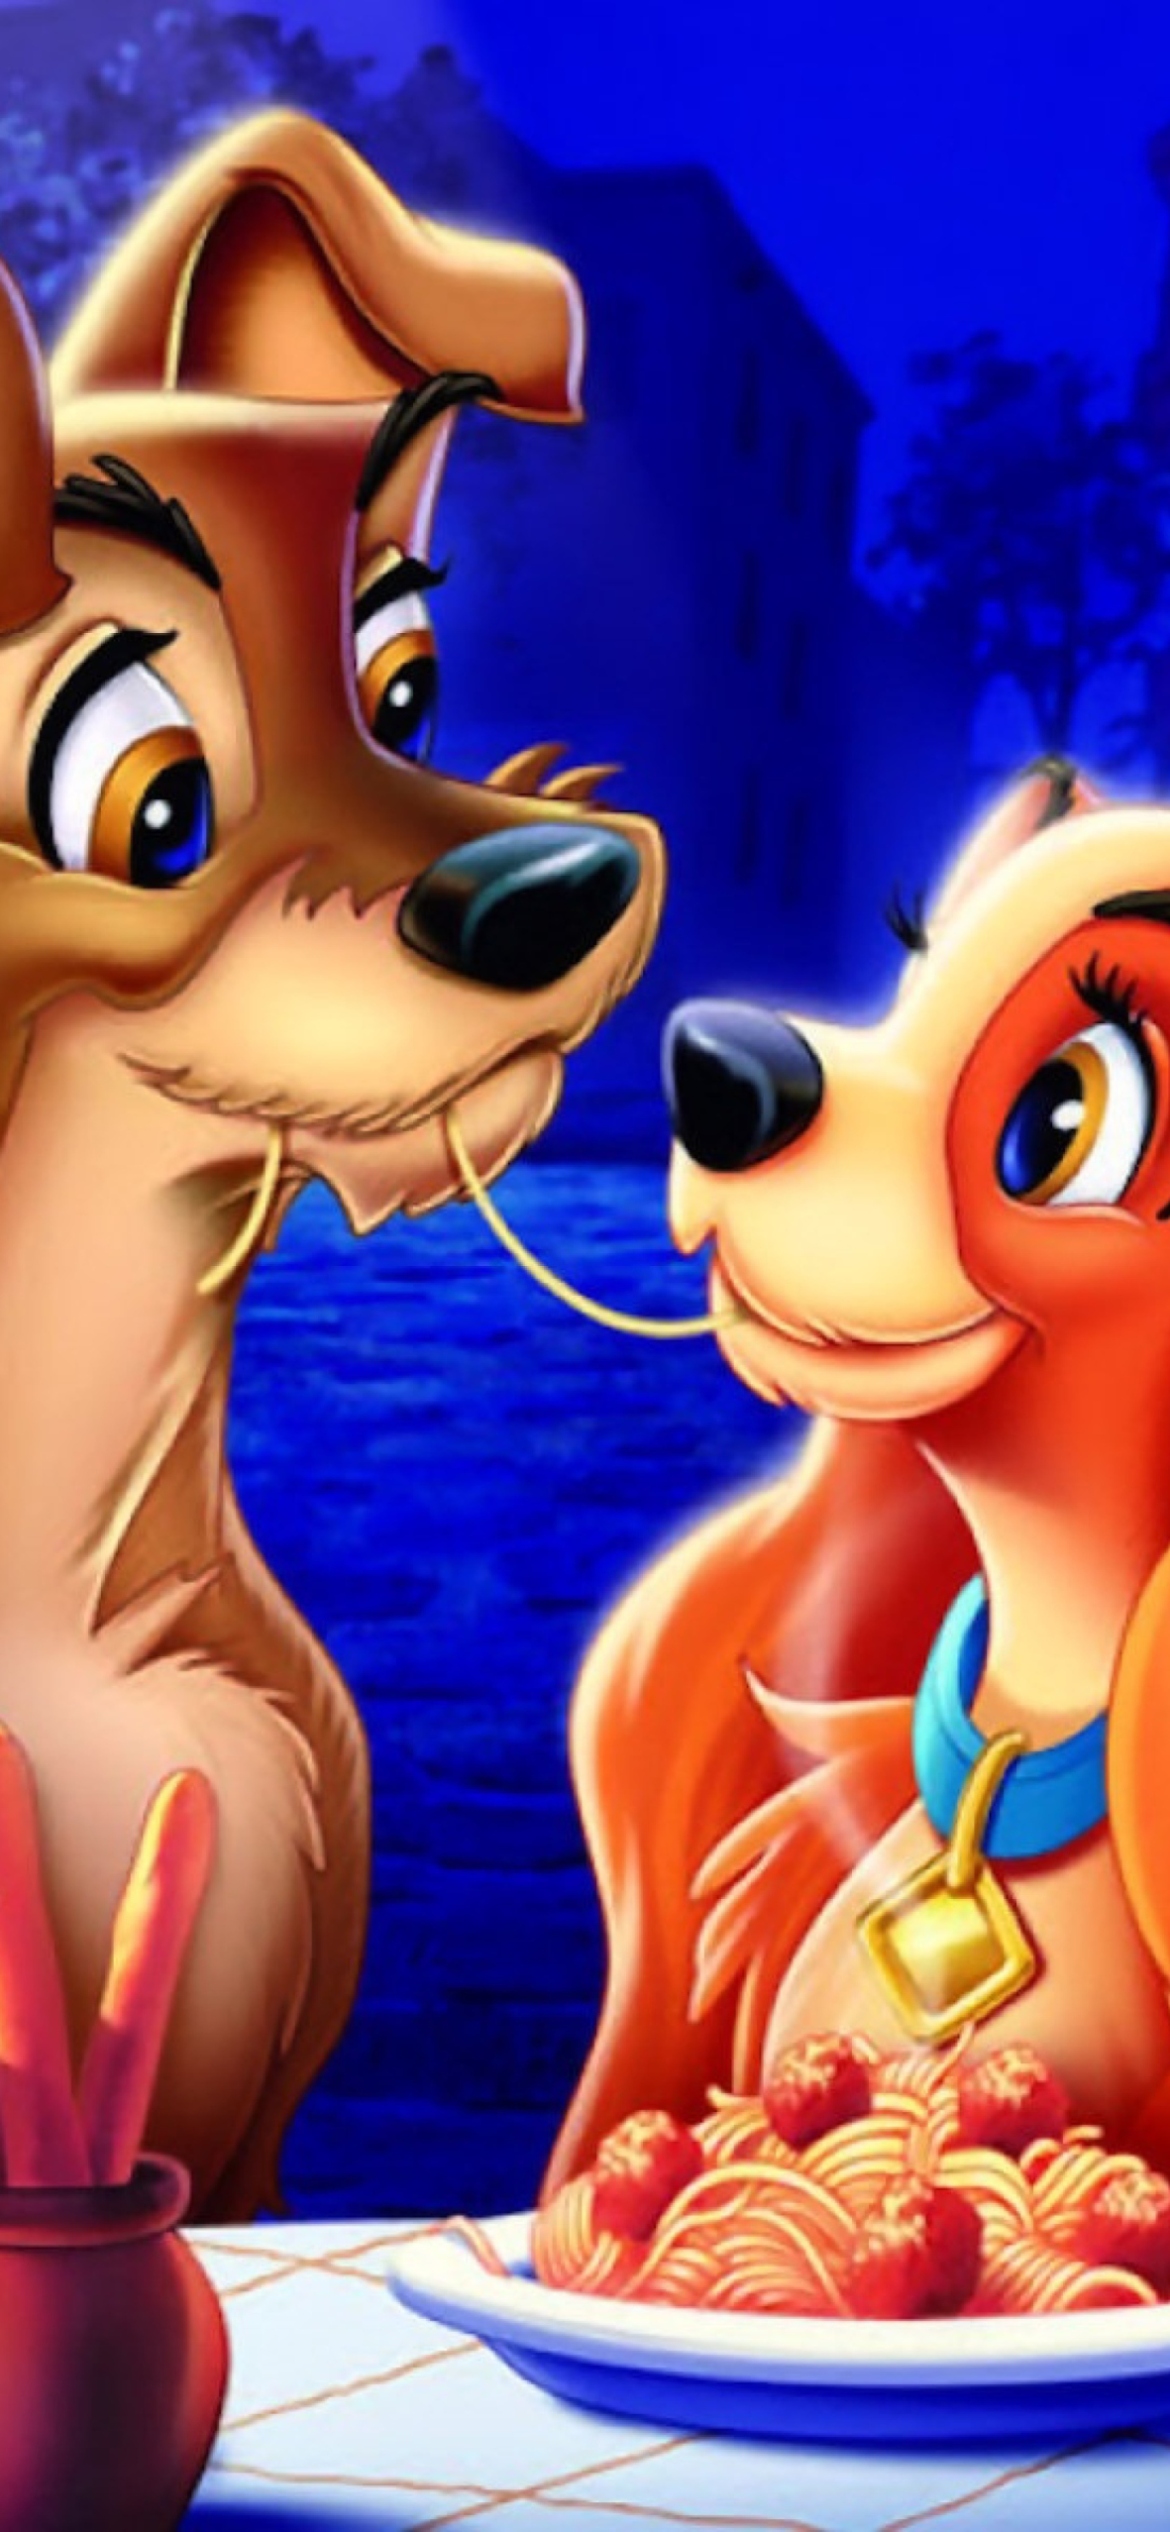 Das Lady And The Tramp Wallpaper 1170x2532